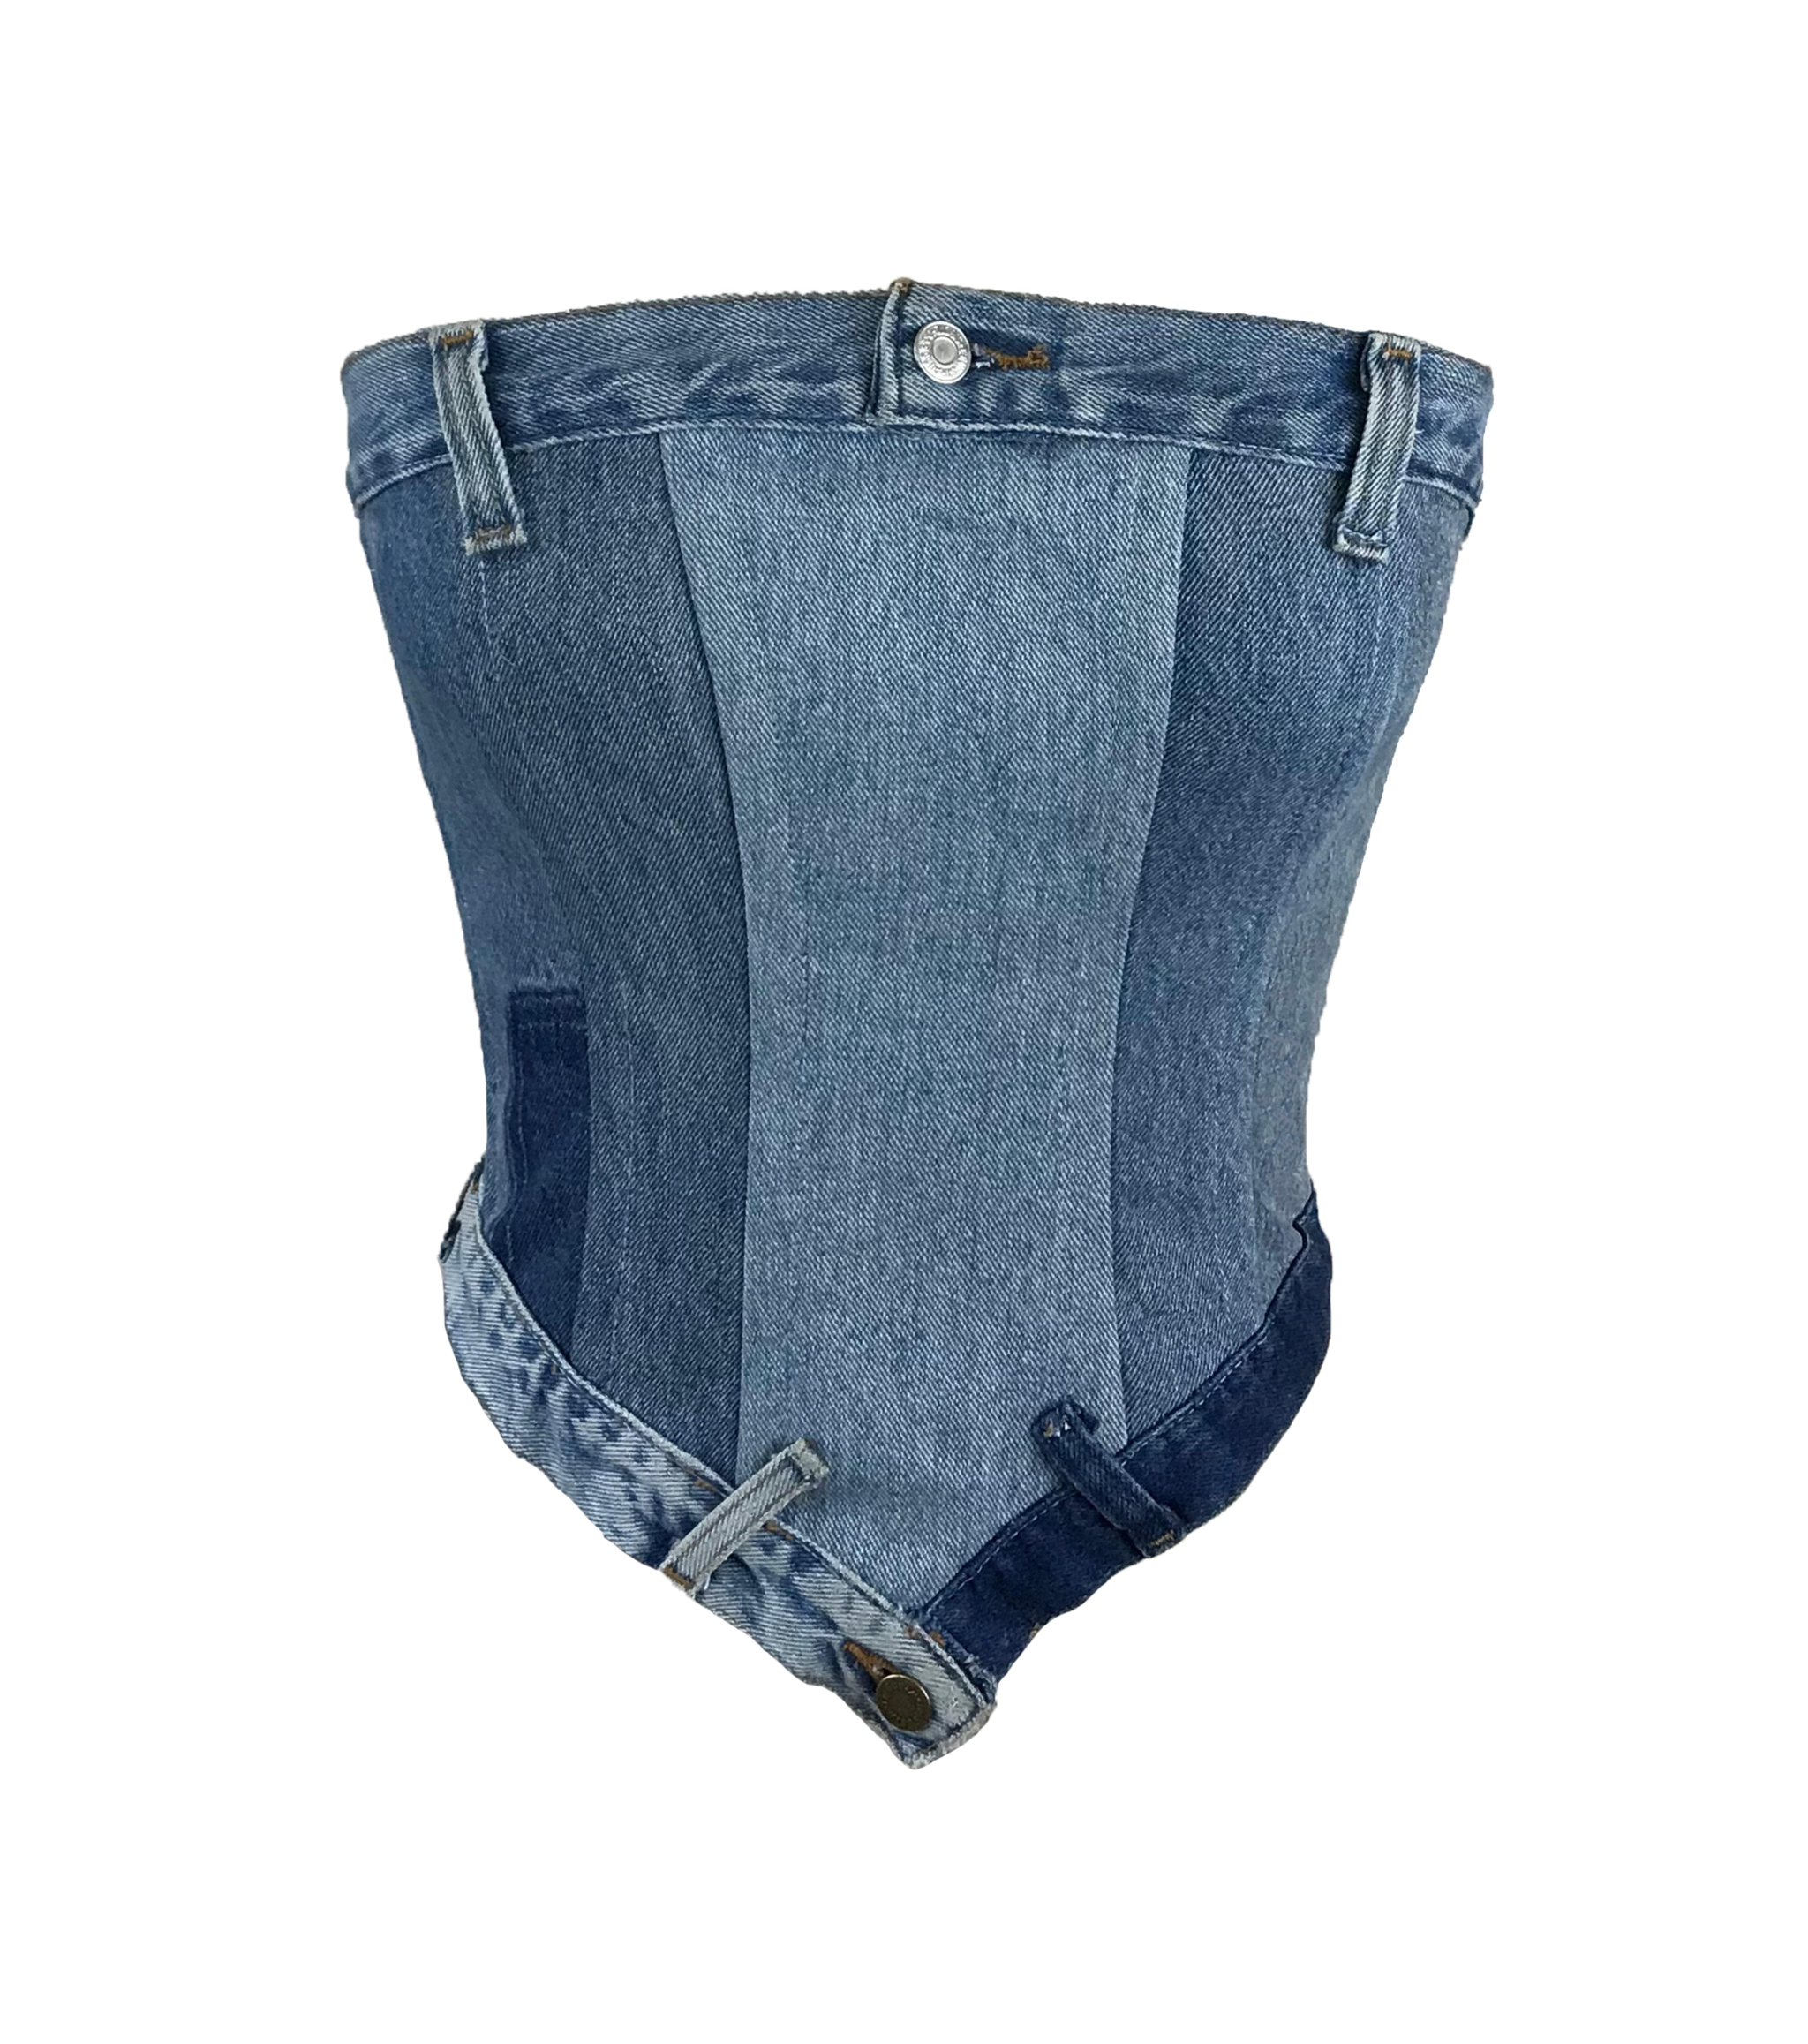 A Blue Jean Corset With A Black And White Background